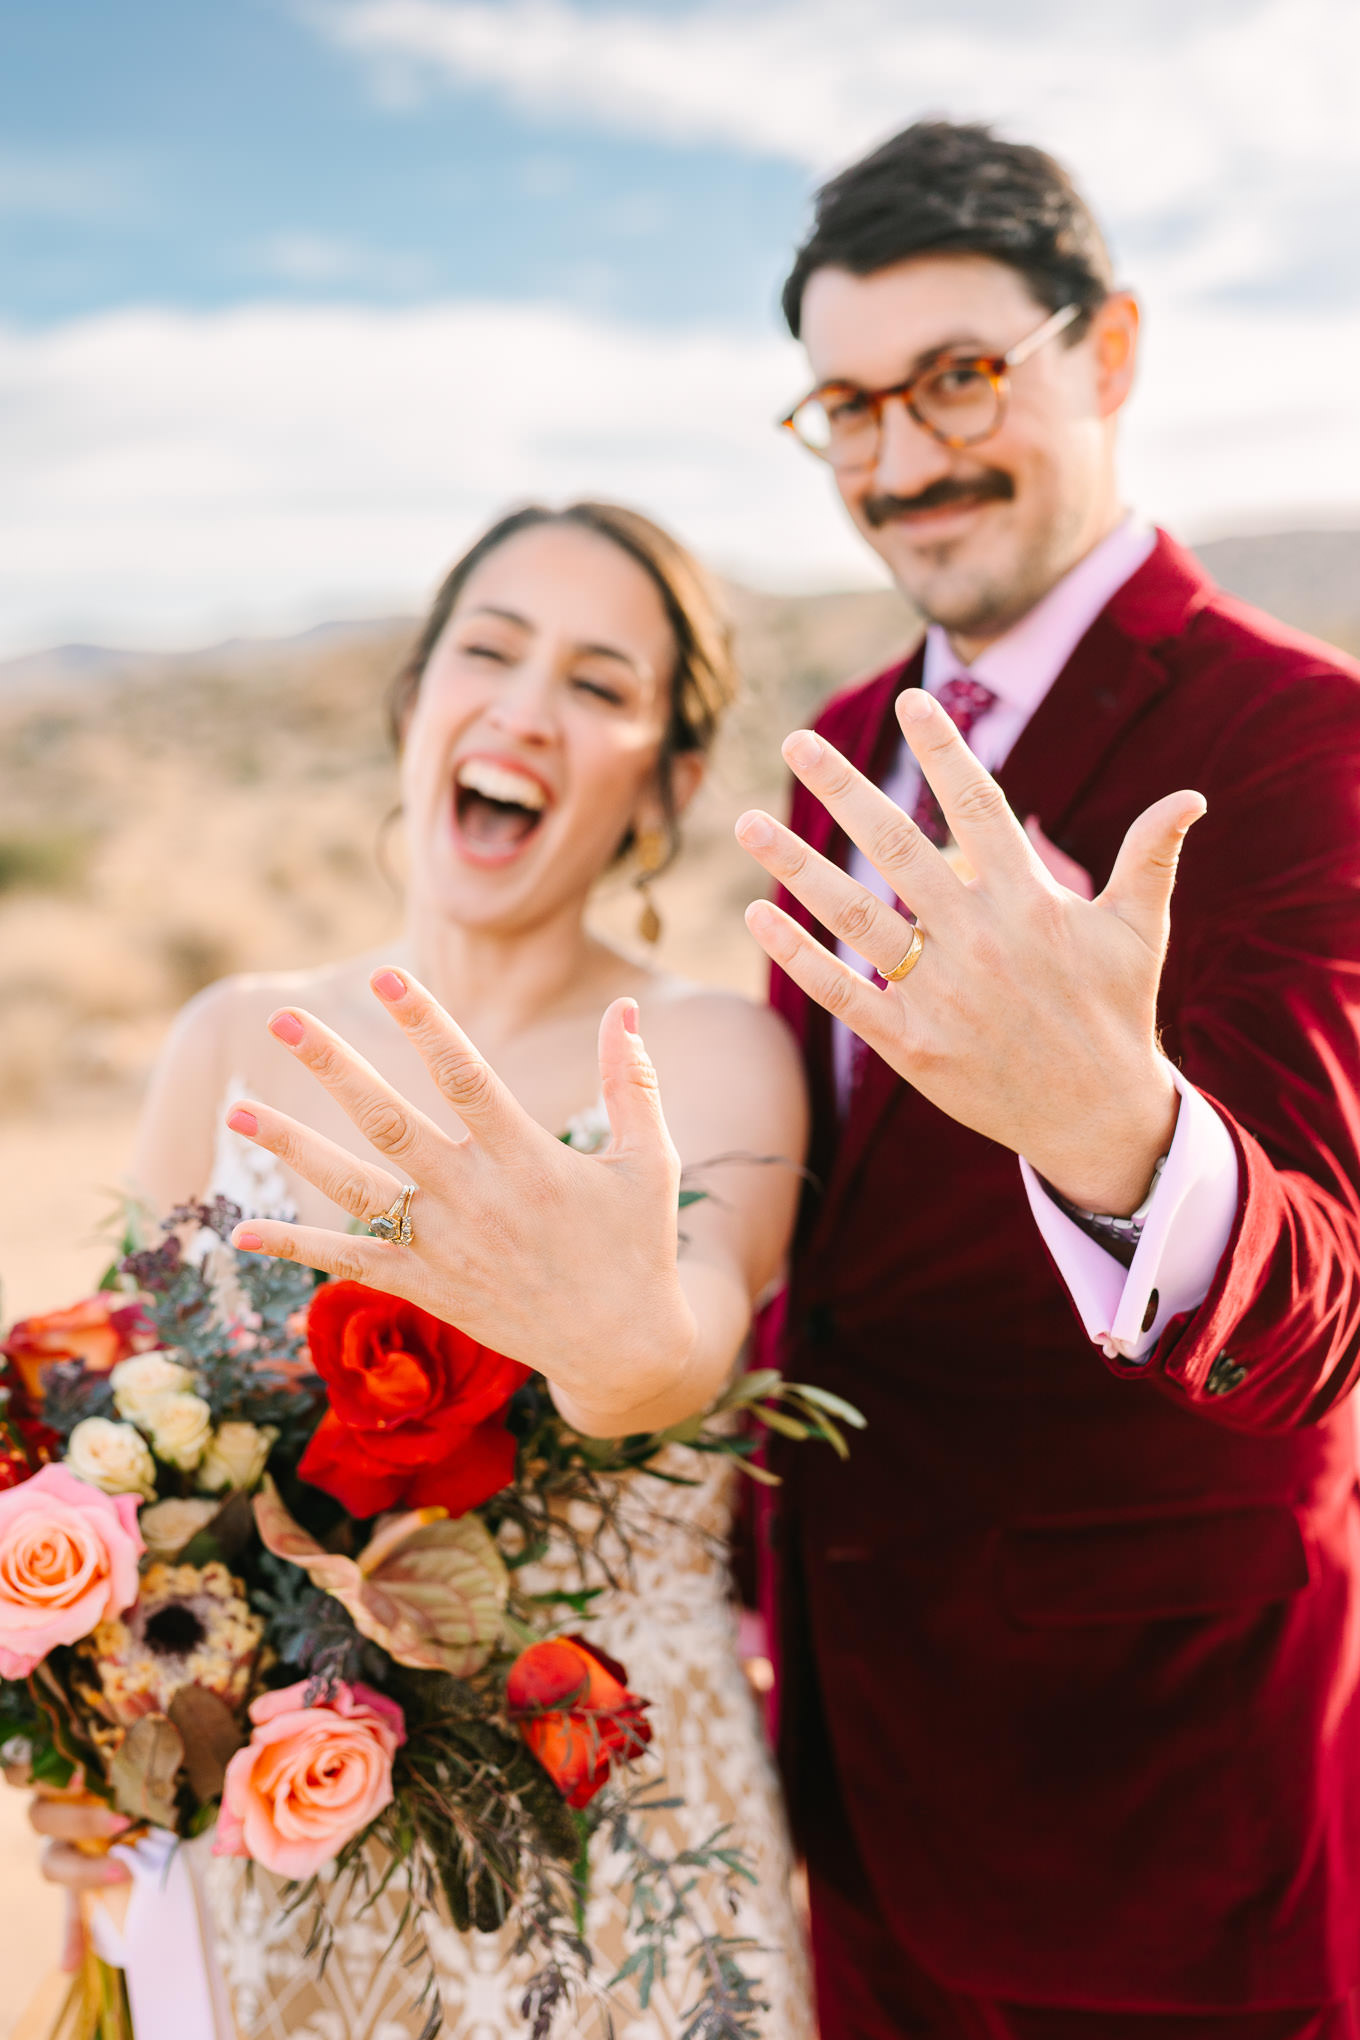 Rimrock Ranch wedding in Pioneertown | Wedding and elopement photography roundup | Los Angeles and Palm Springs photographer | #losangeleswedding #palmspringswedding #elopementphotographer Source: Mary Costa Photography | Los Angeles